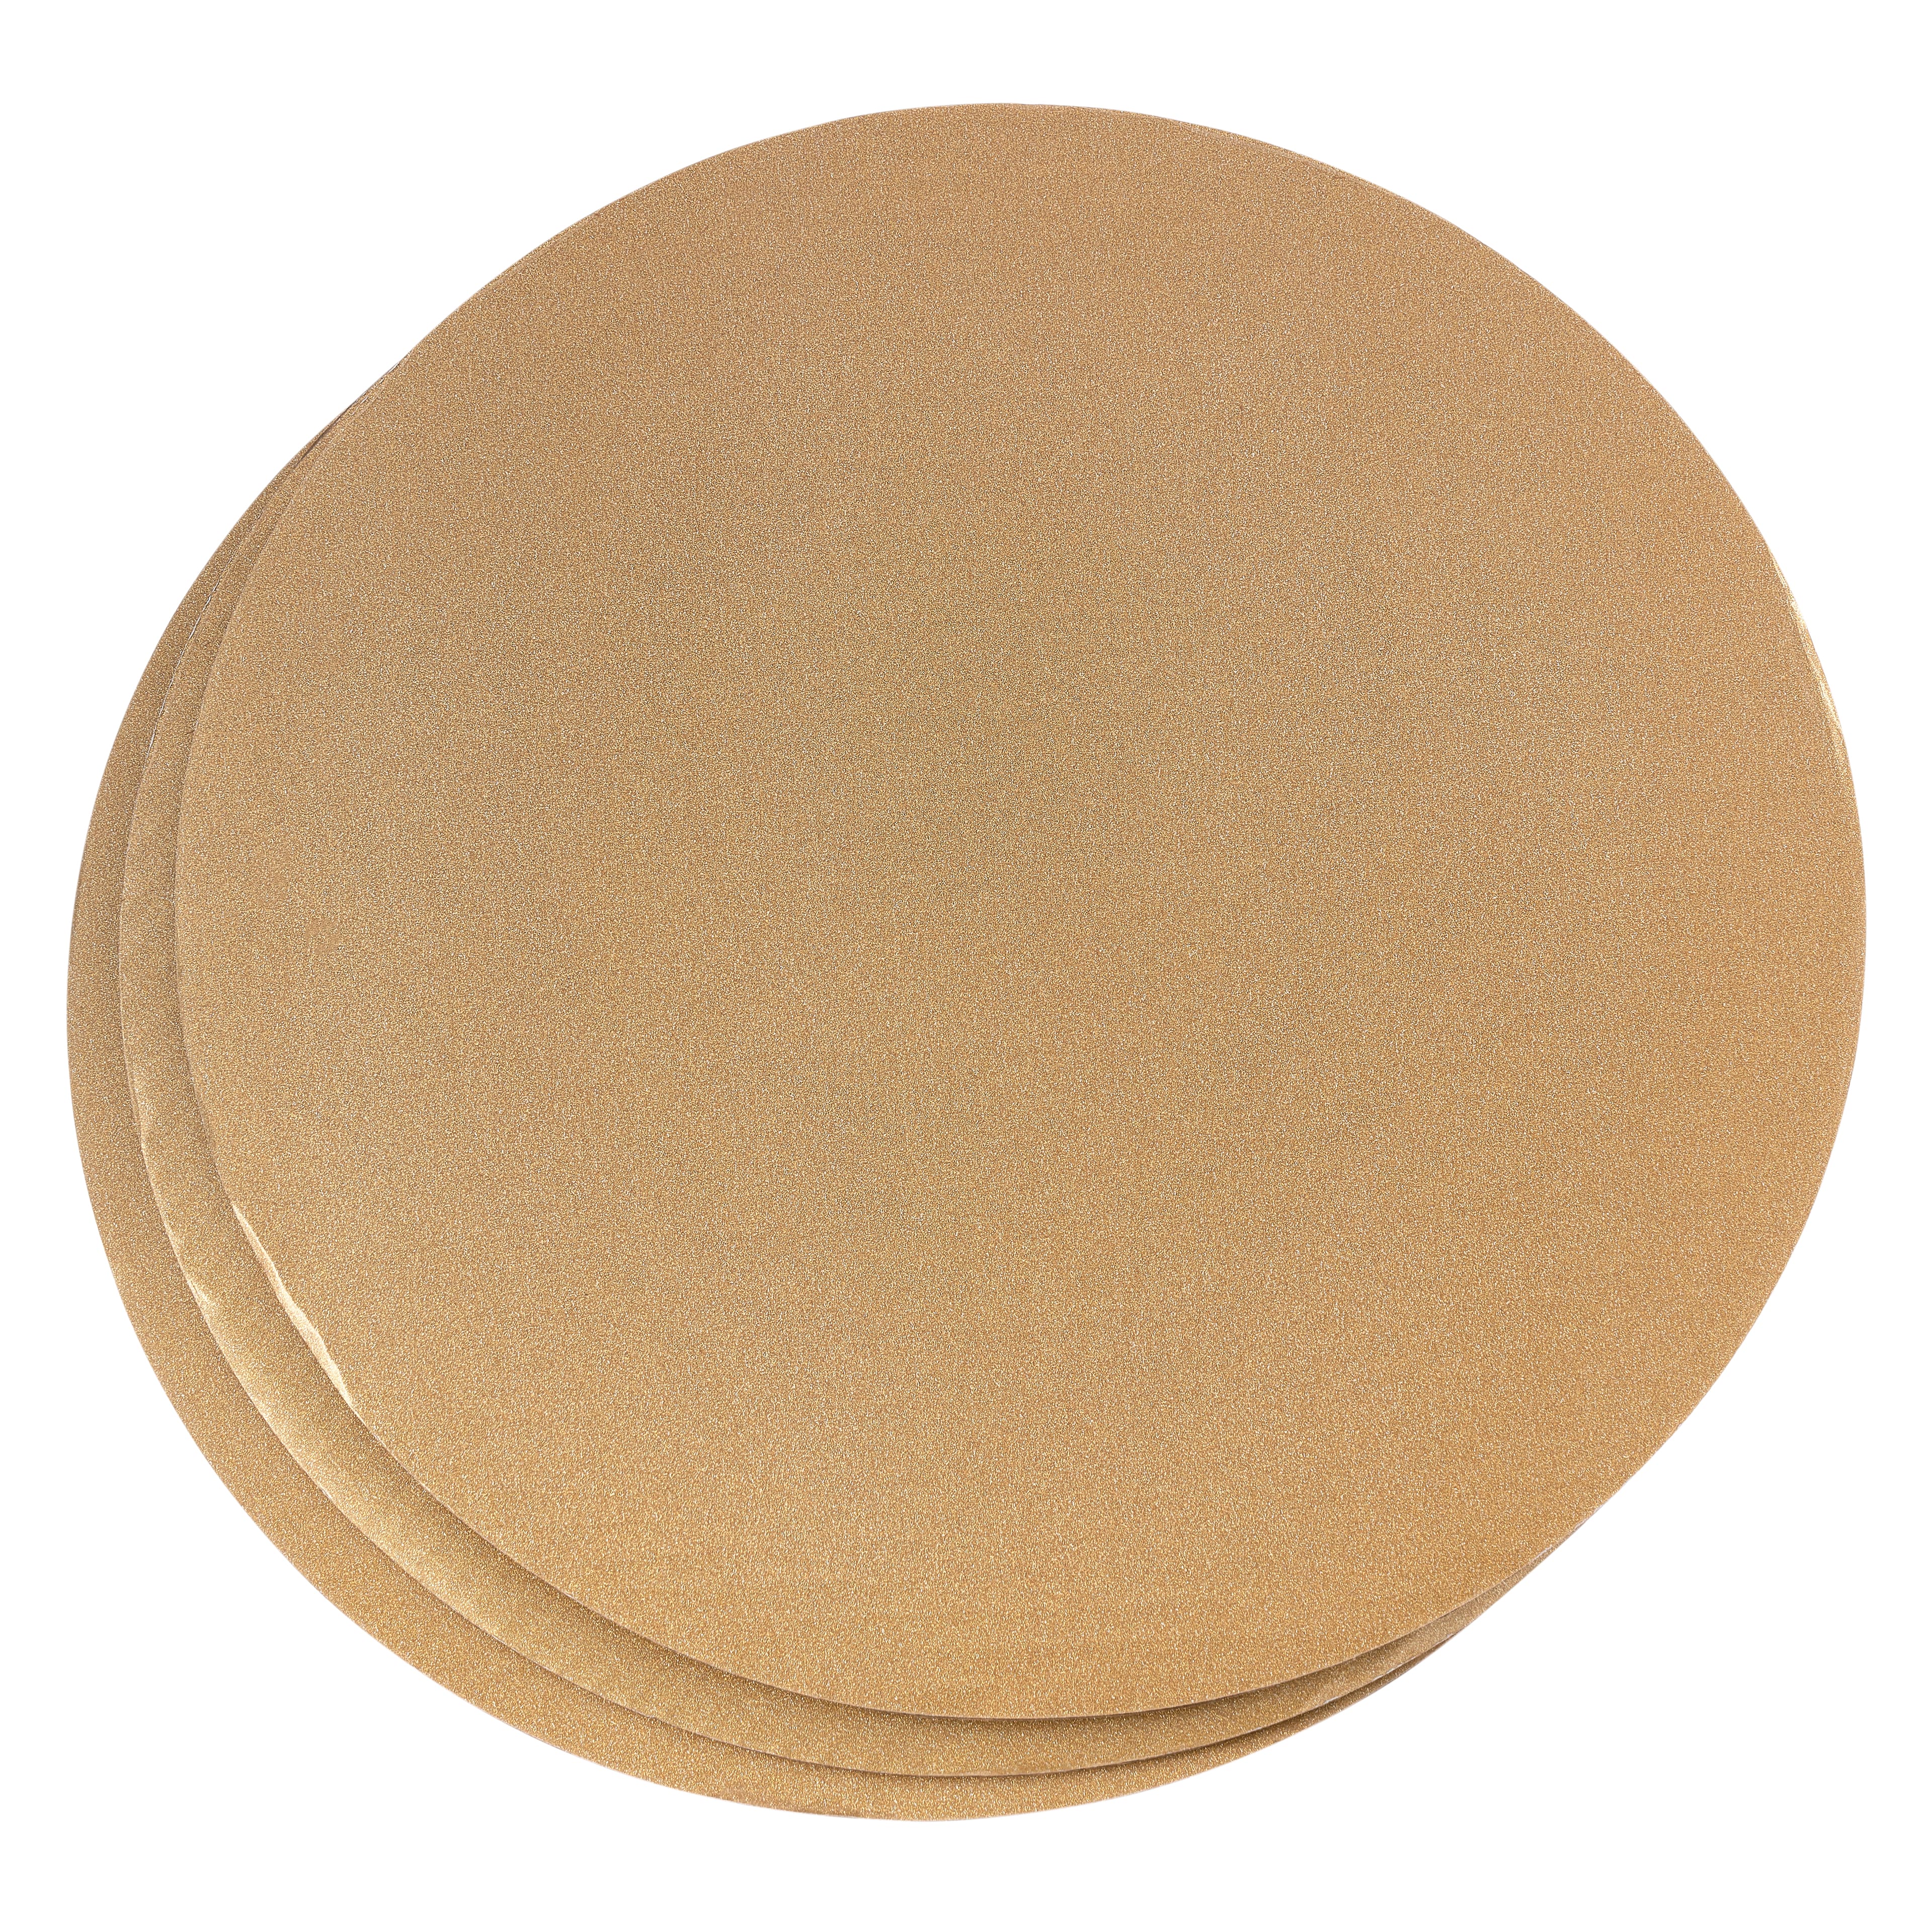 Cake Board Double Thick Round Silver 12 Inch/30cm - Cake Boards